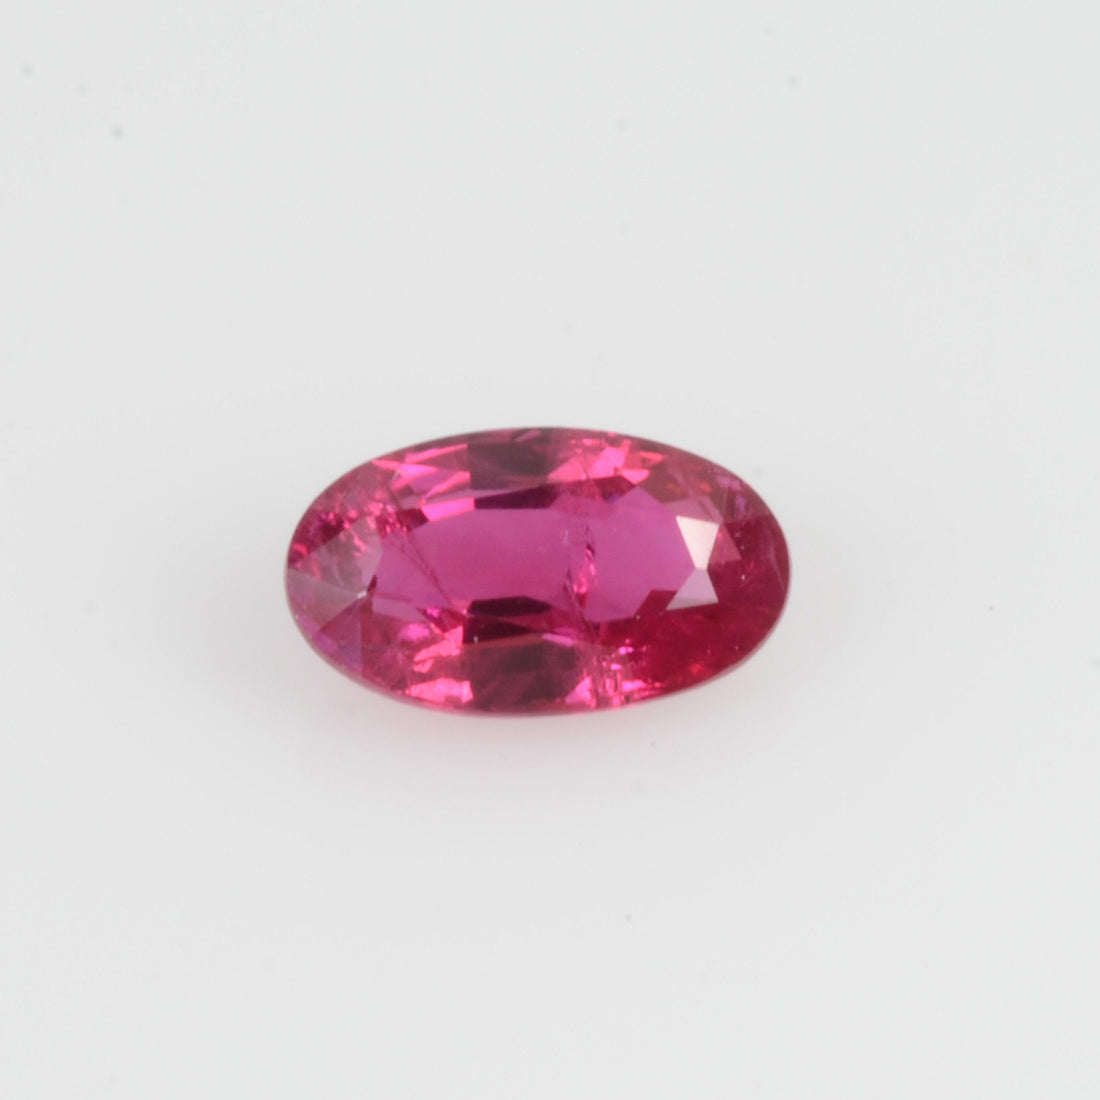 0.37 Cts Natural Ruby Loose Gemstone Oval Cut